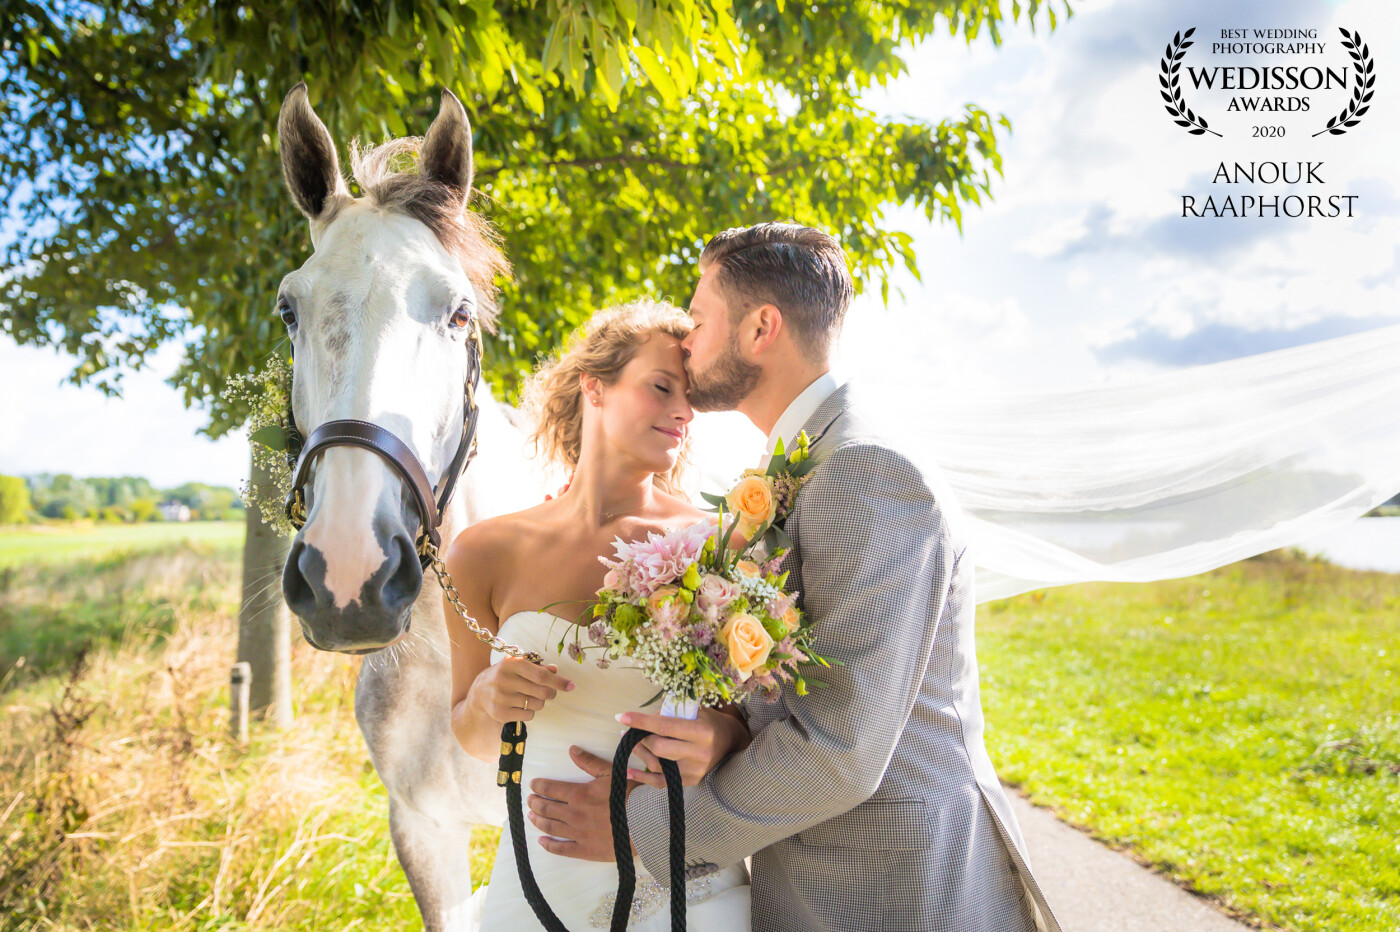 This picture means the pure love between human and animal. Her horse felt her love. The groom gives his love to his bride while the wind is blowing through her veil.